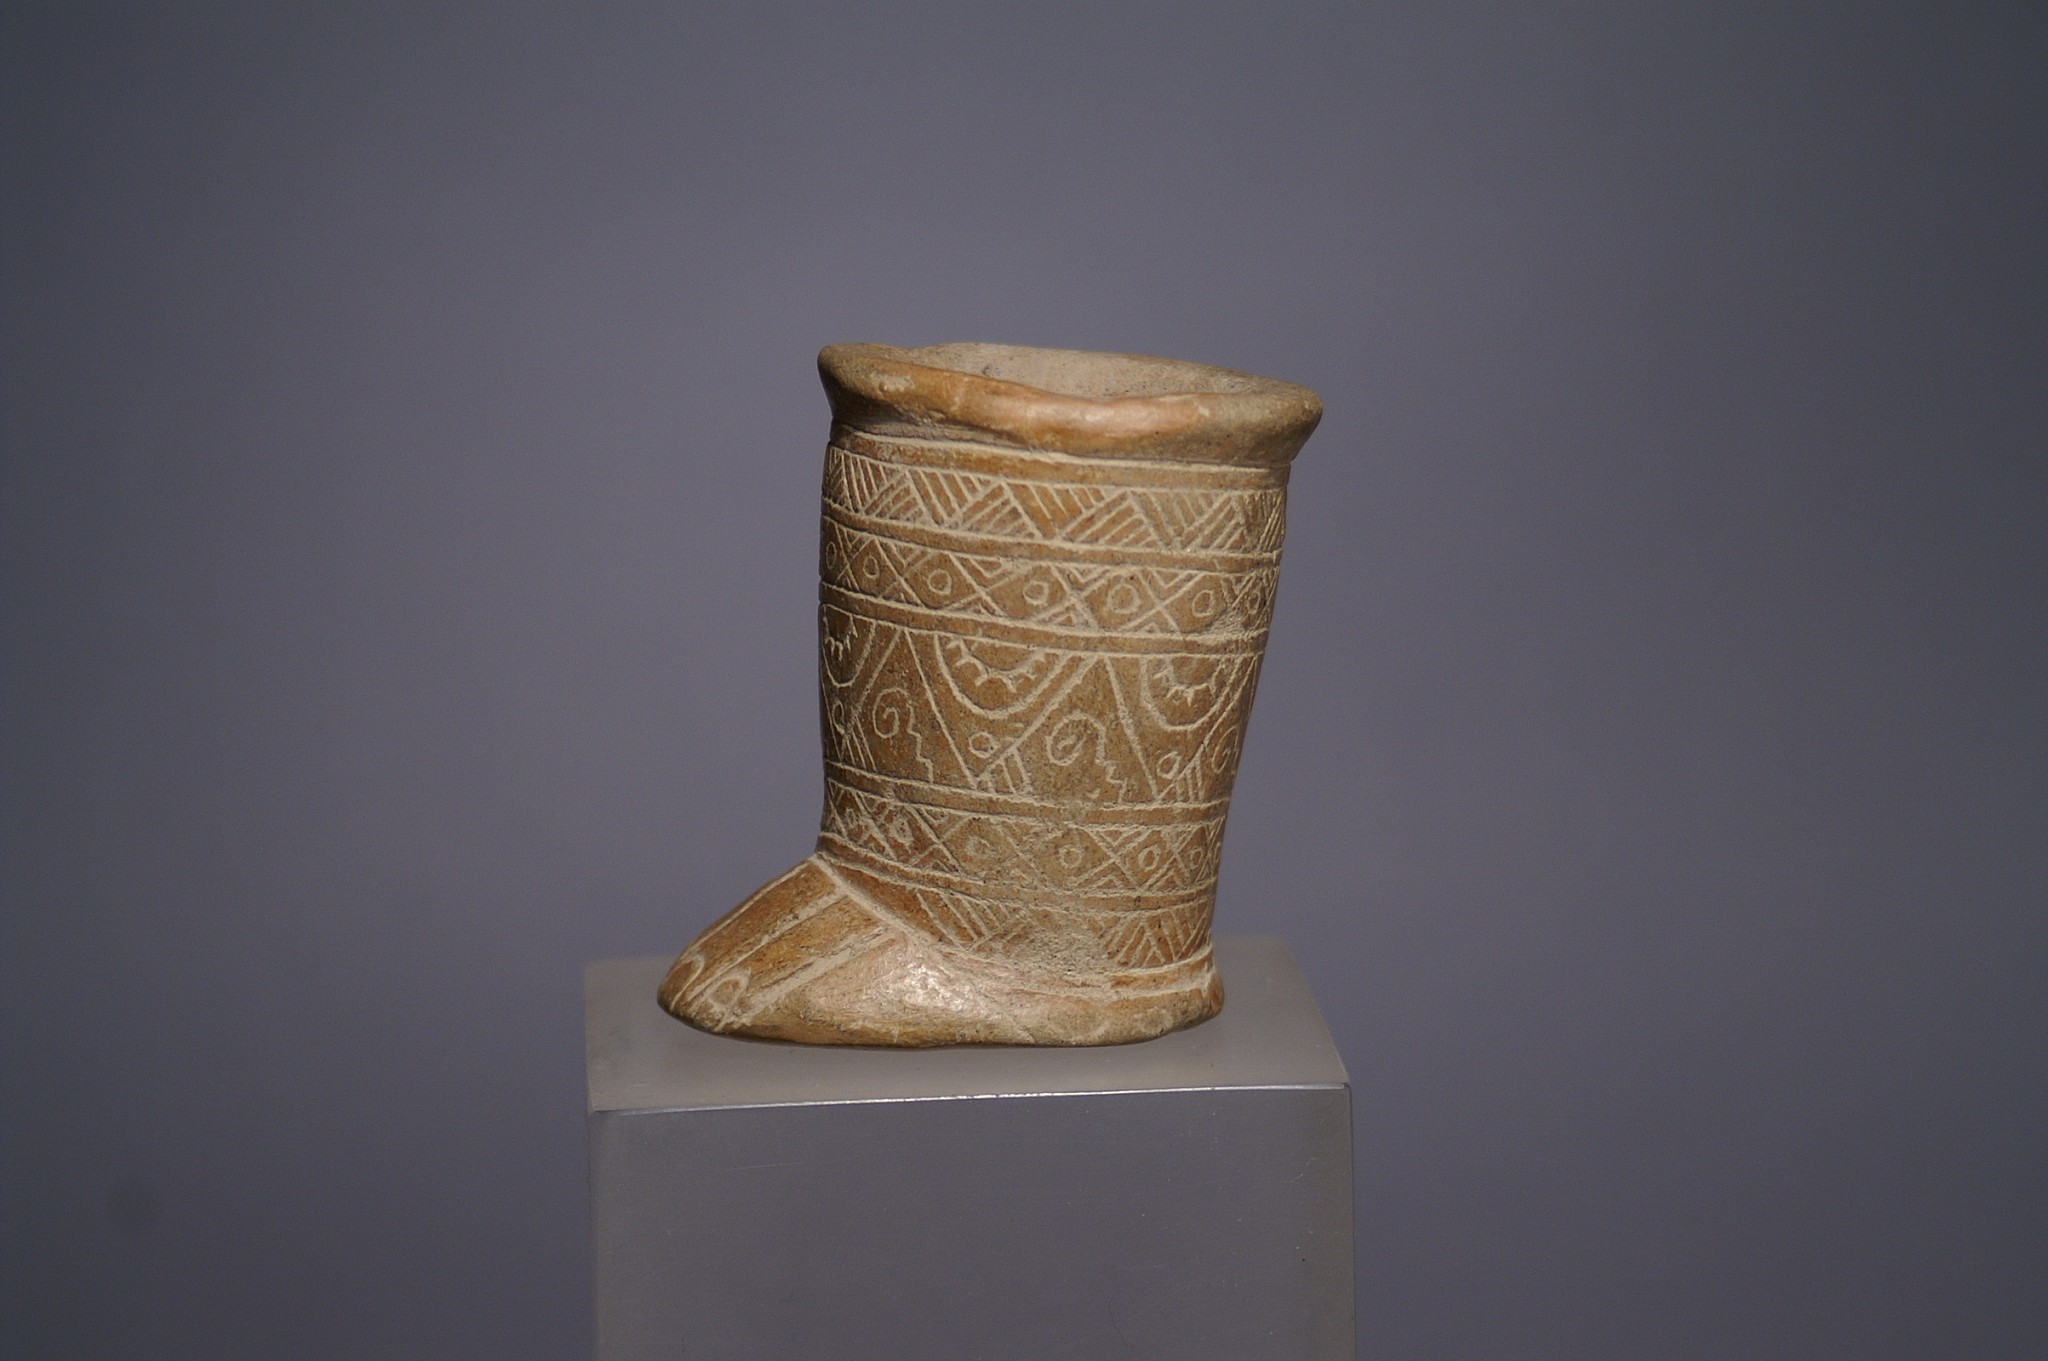 Ecuador, Monteno incised ceramic container in the form of a  foot with suspension hole
This is typical of a  lime container from the Monteno region and decorated with 4 bands of geometric designs.  A similar votive foot  vessel is illustrated in Amerindian Signs item 141
Media: Ceramic
Dimensions: Height 2 3/4"
$950
N1049